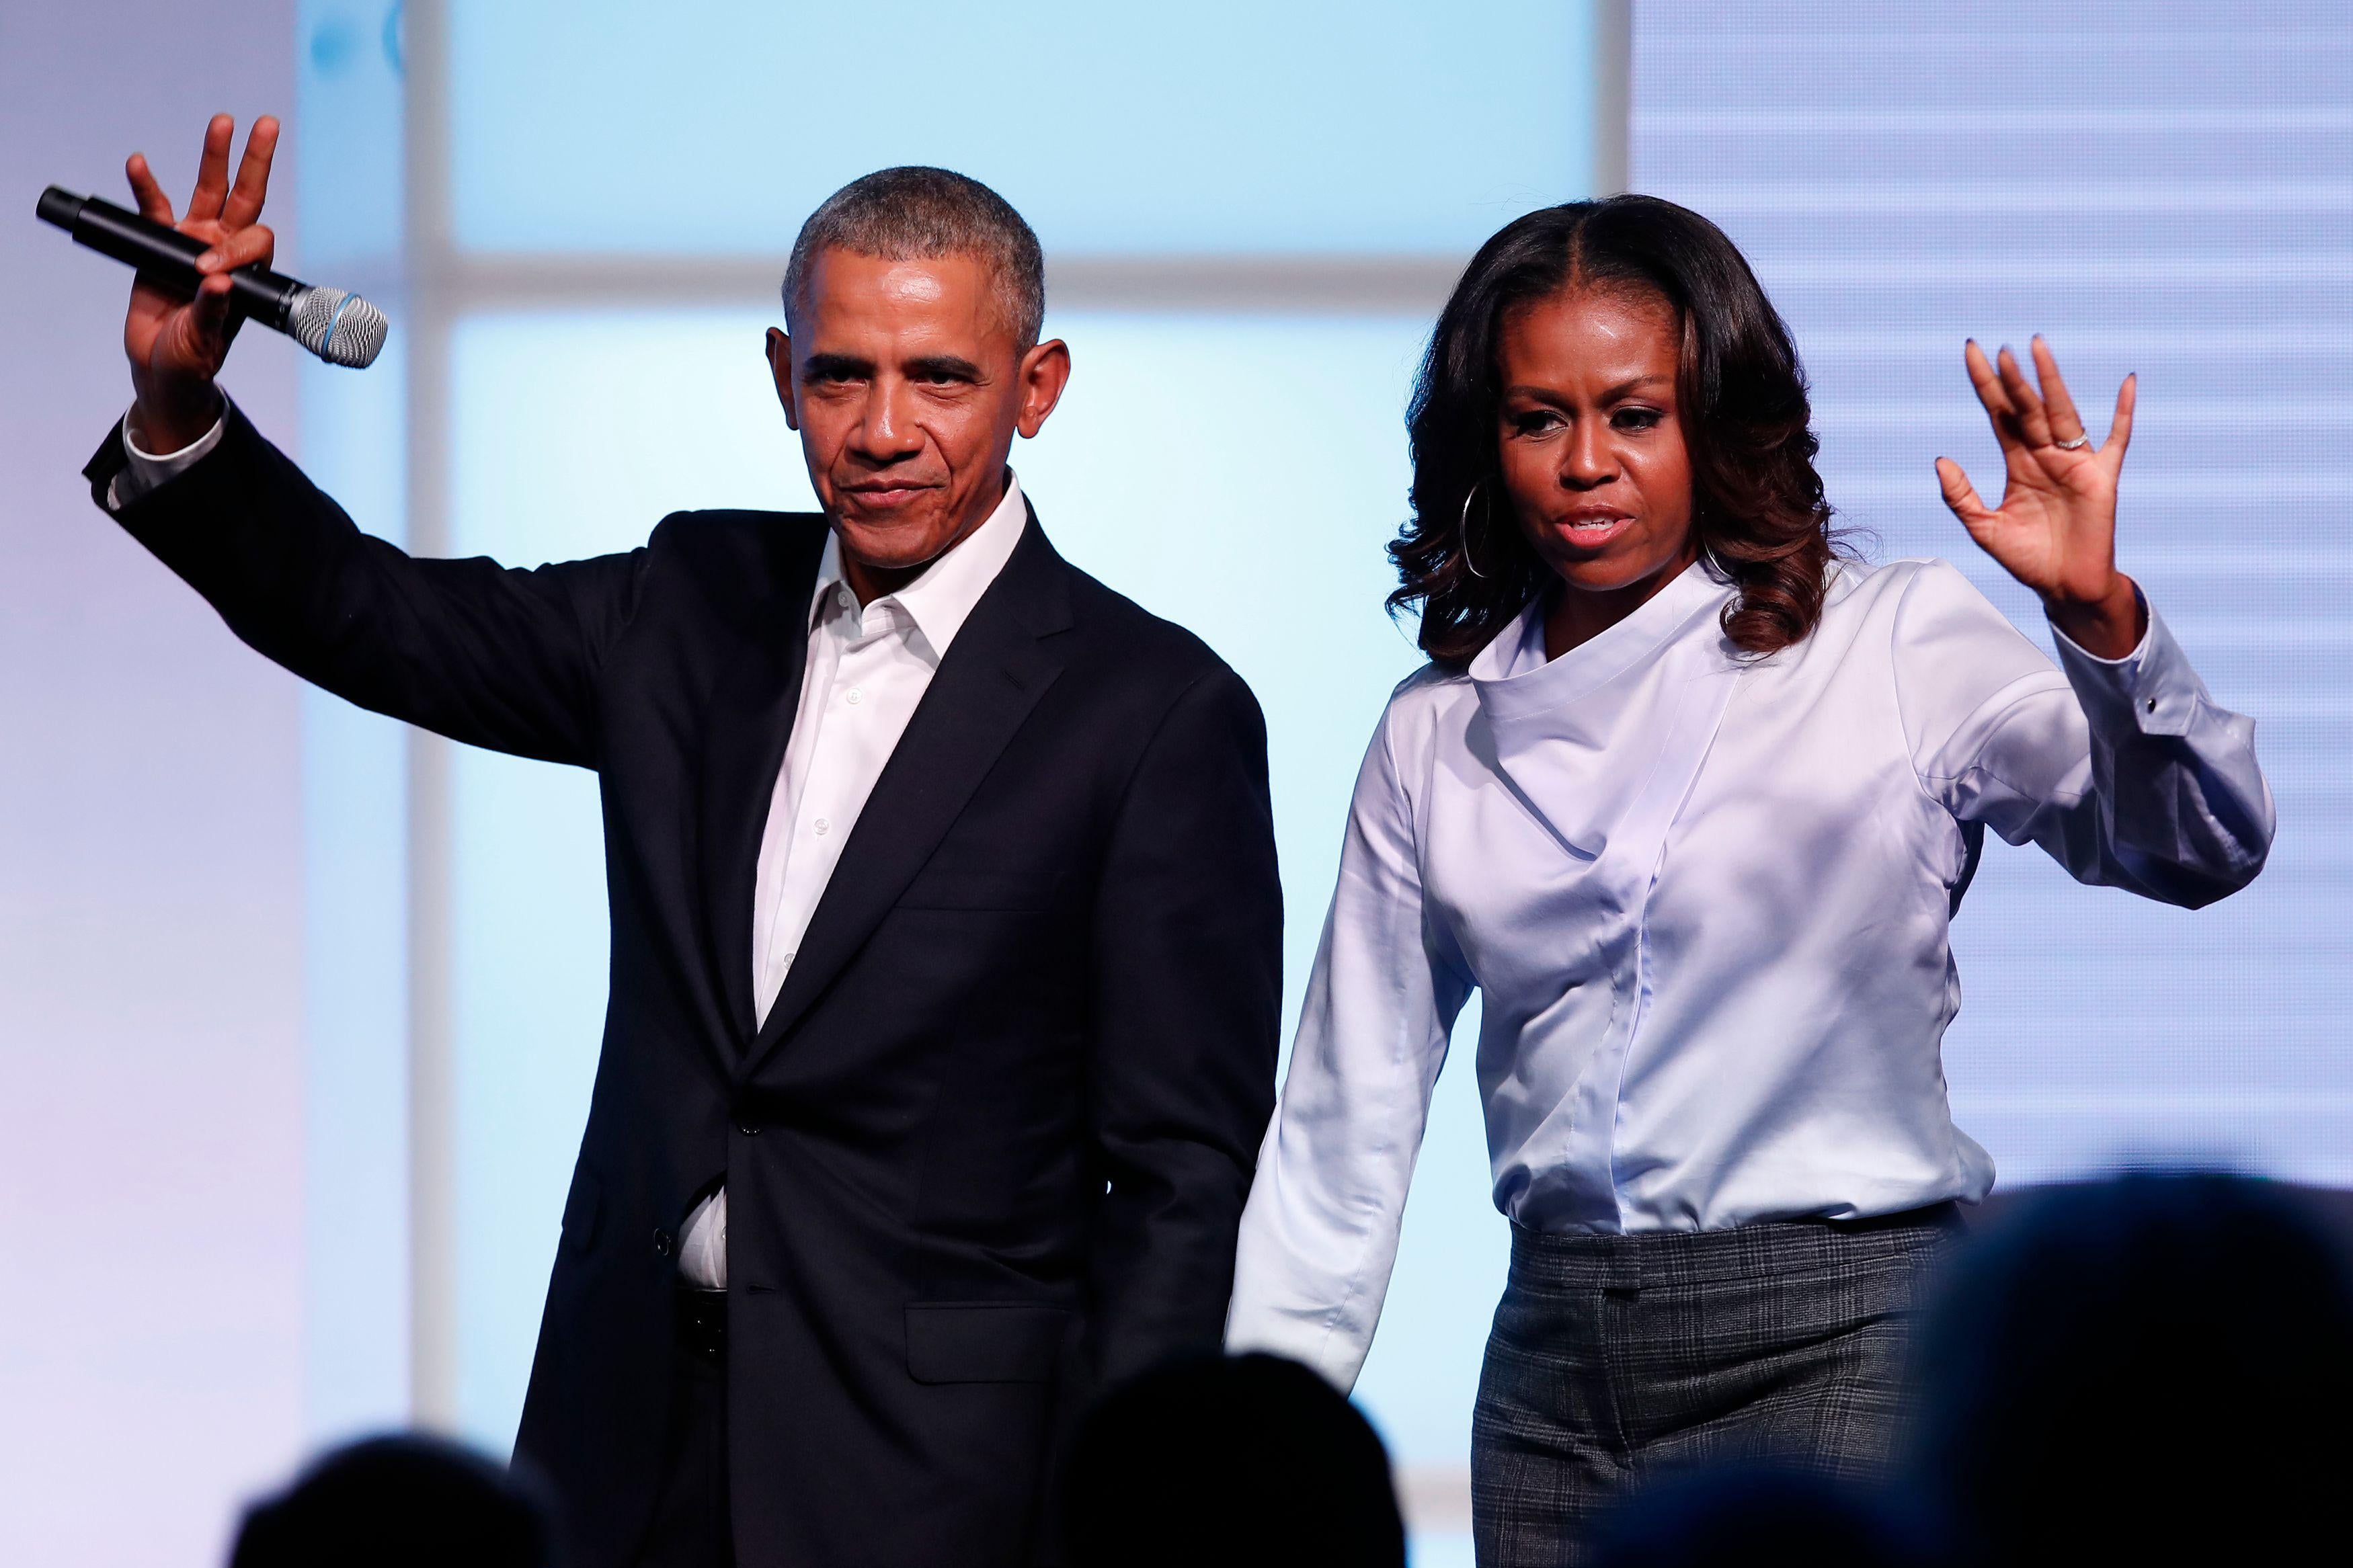 Barack and Michelle Obama hold hands on stage and wave out at the crowd.